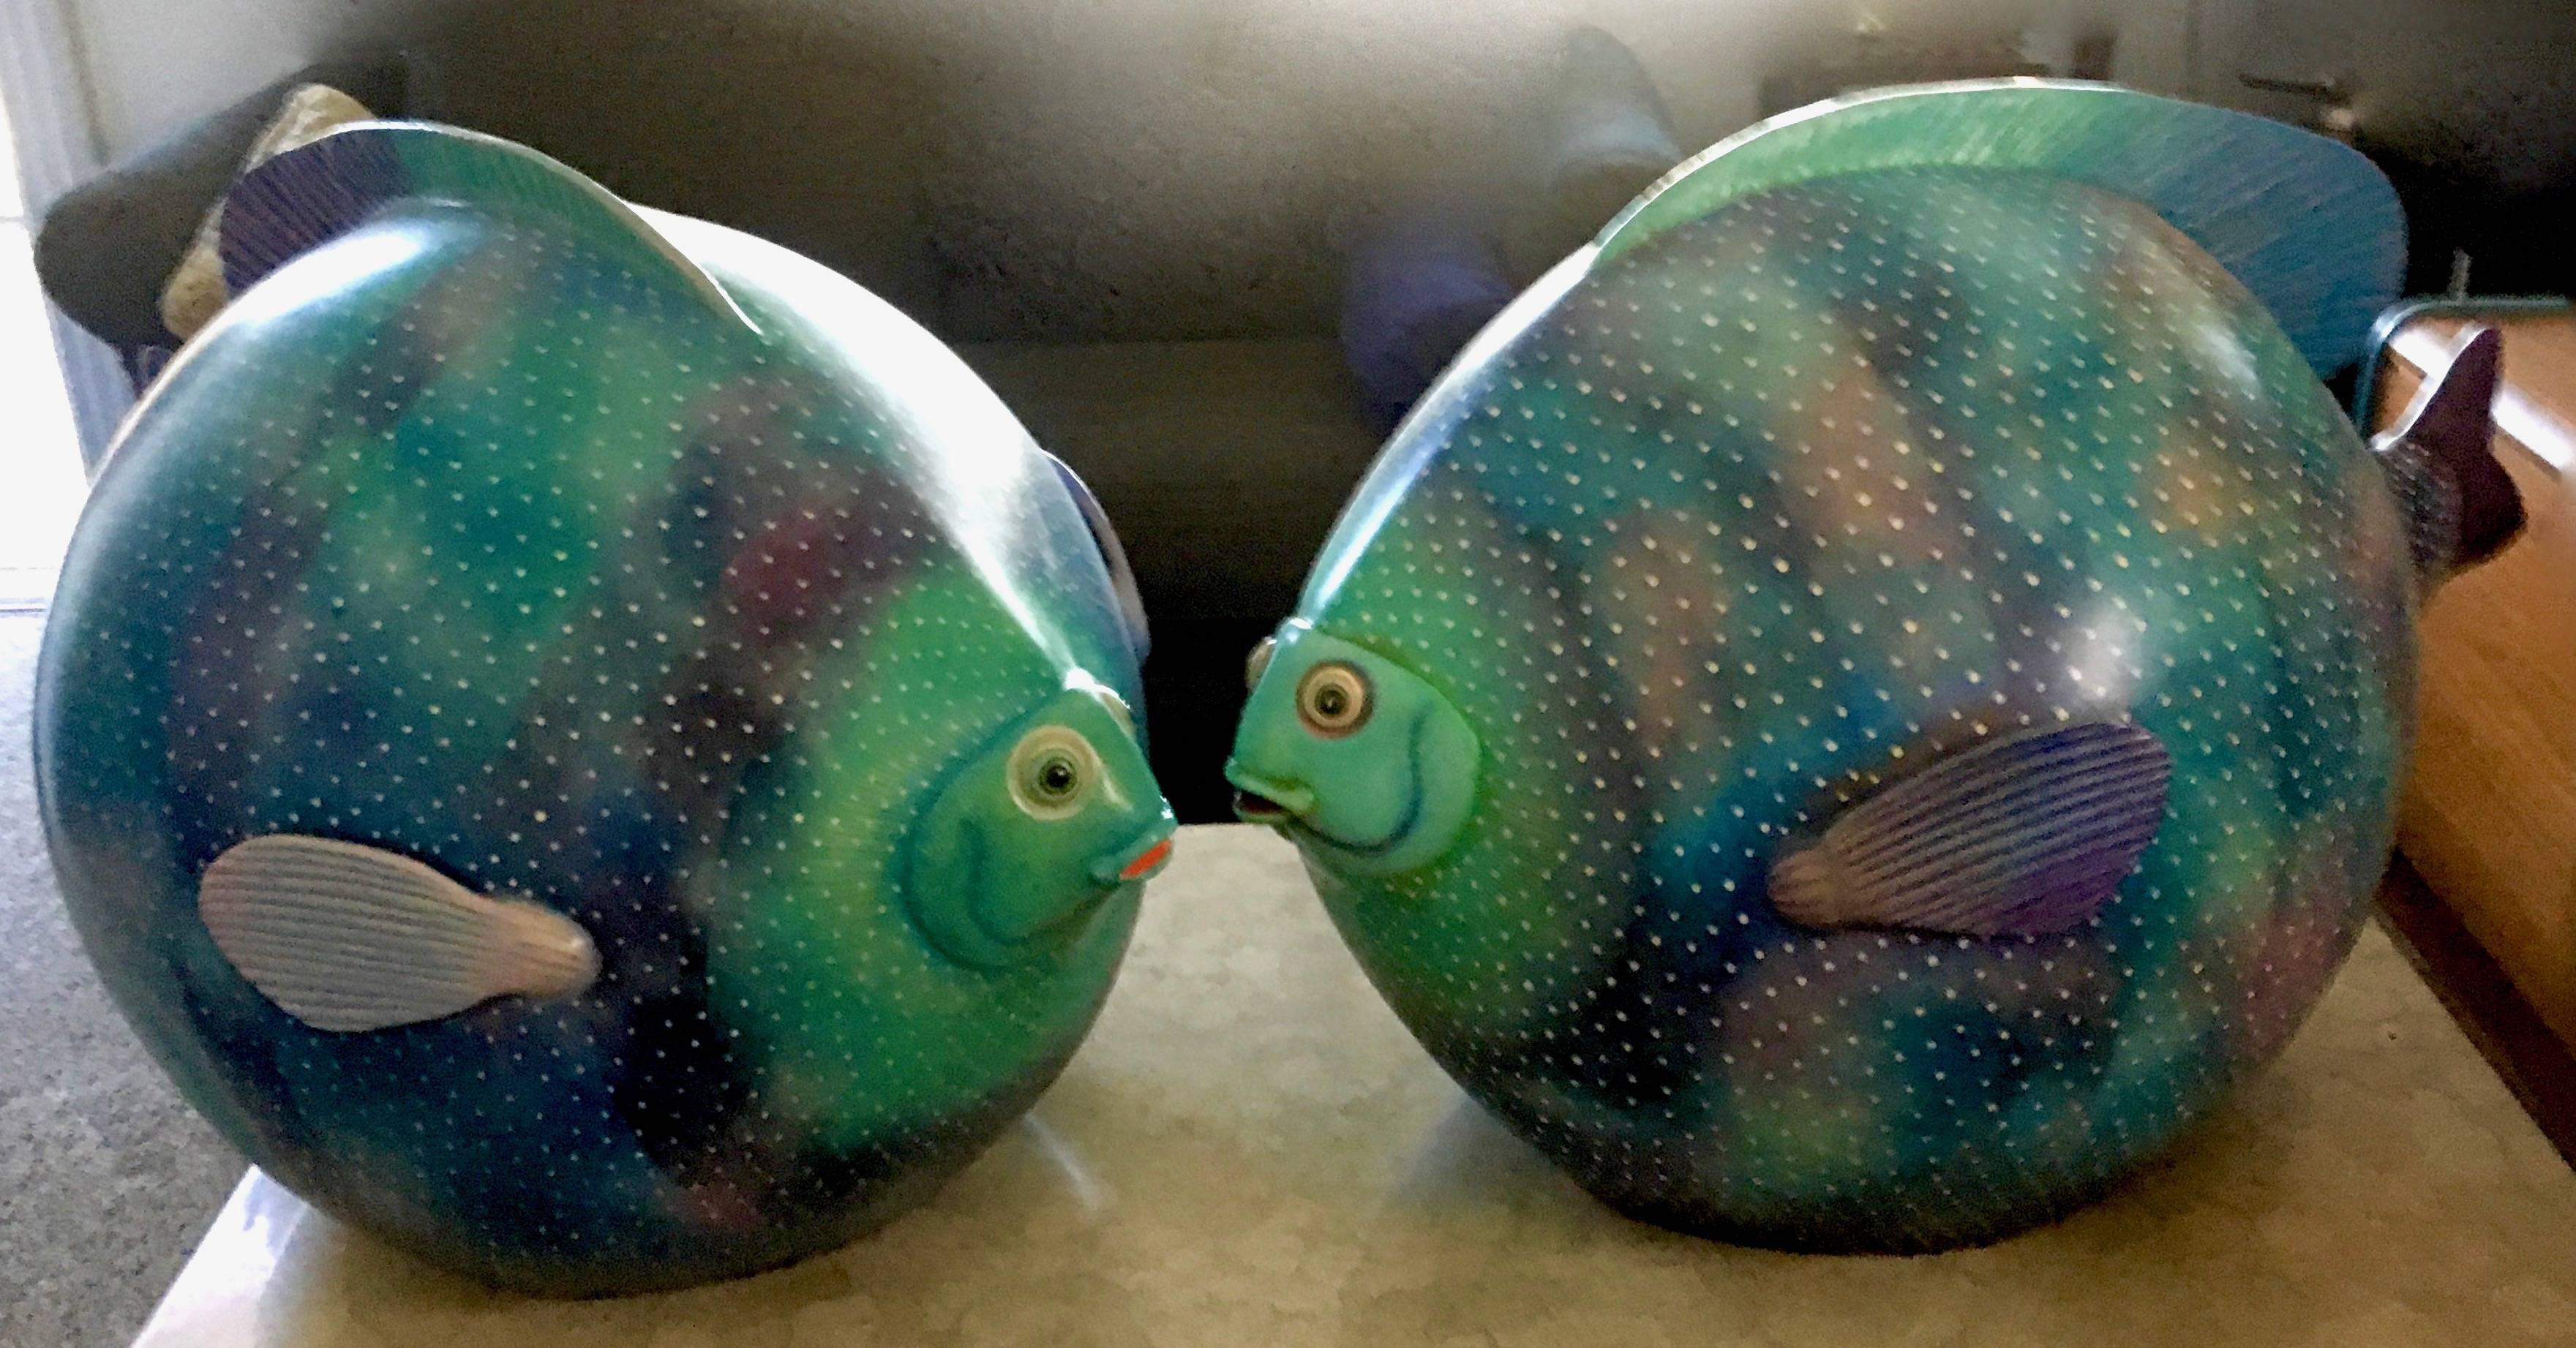 Glazed Pair of Signed Ceramic Fish Sculpture by Mexican Artist Sergio Bustamante For Sale